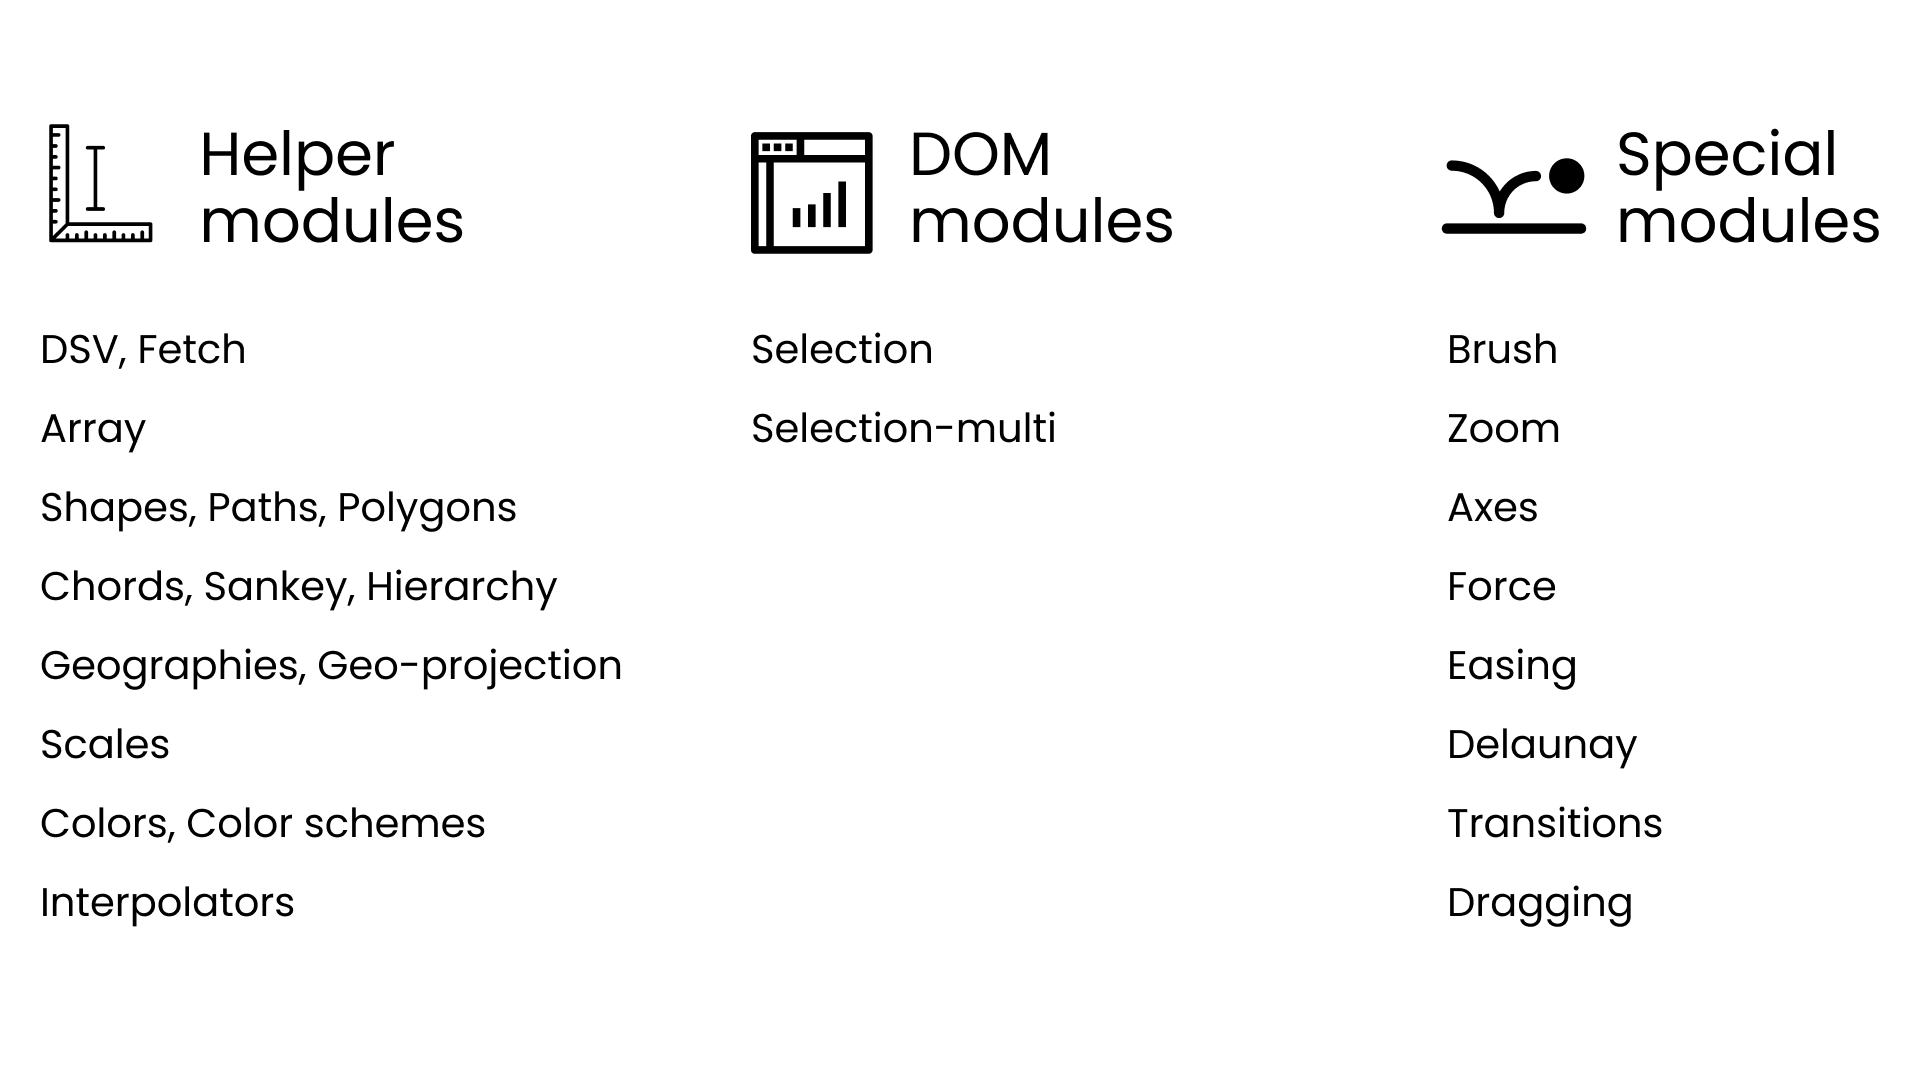 A diagram listing the types of modules contained in D3